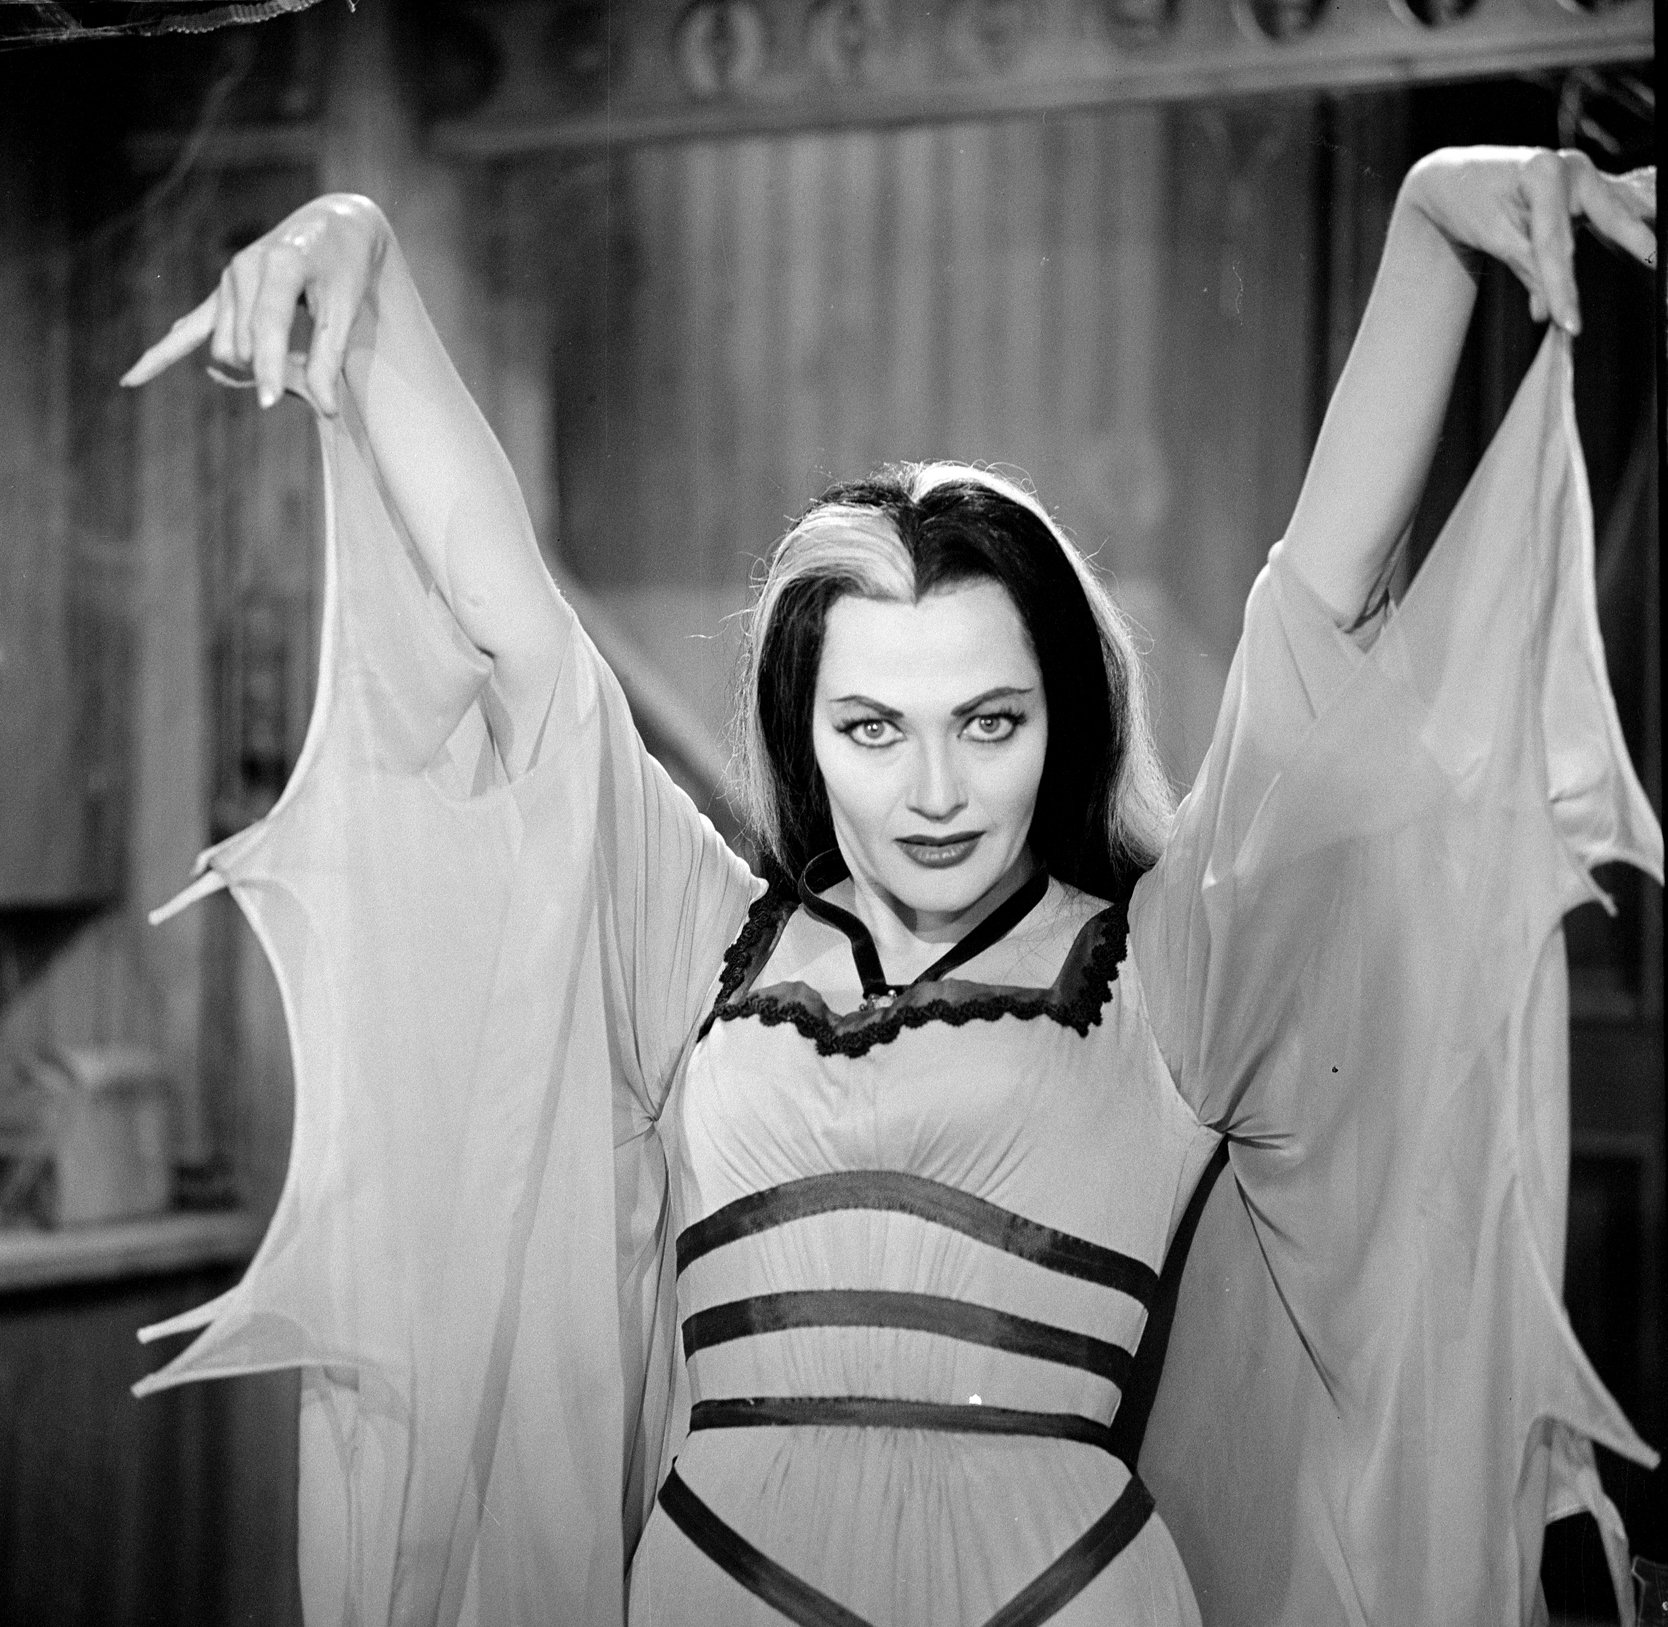 'The Munsters' star Yvonne De Carlo dressed as her character Lily Munster during a scene.